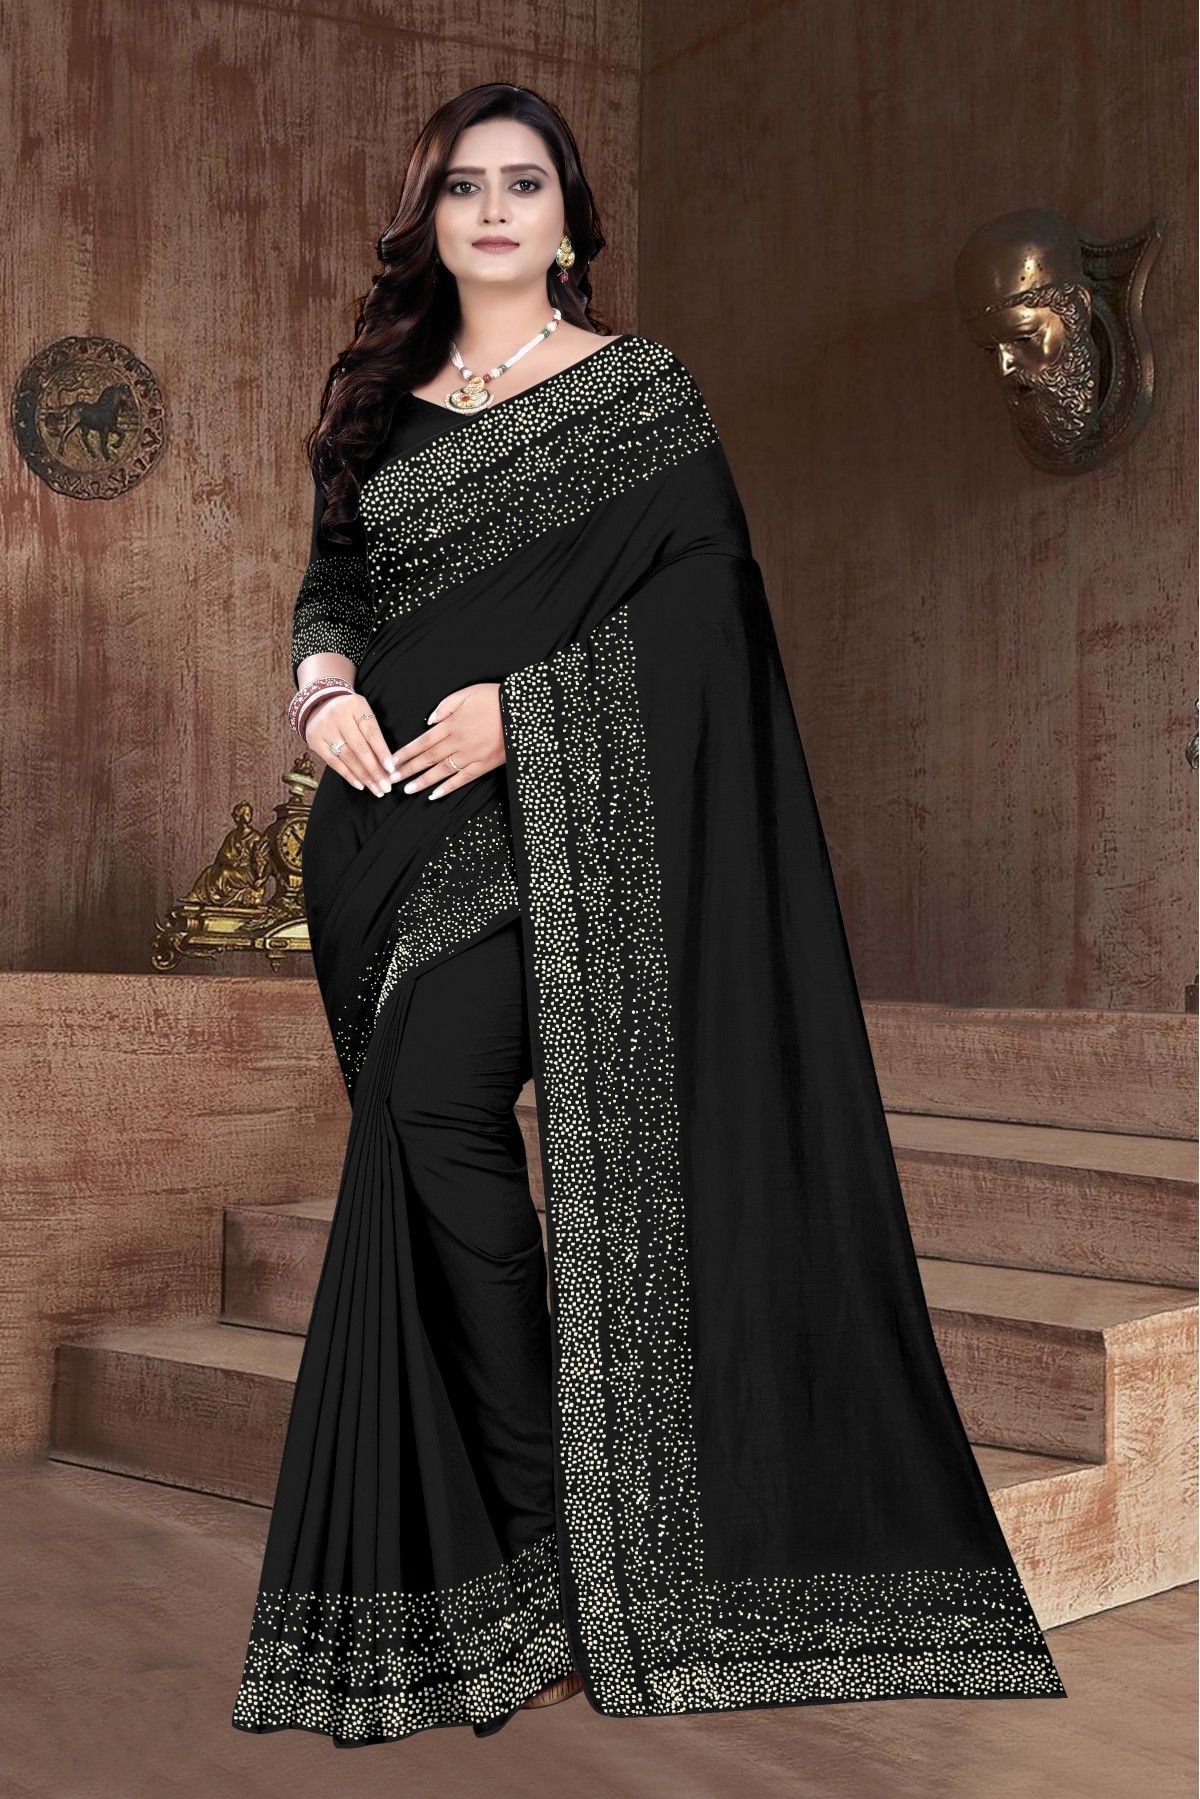 Black Color Georgette Ruffled Saree With Blouse | Lovely Wedding Mall-sgquangbinhtourist.com.vn